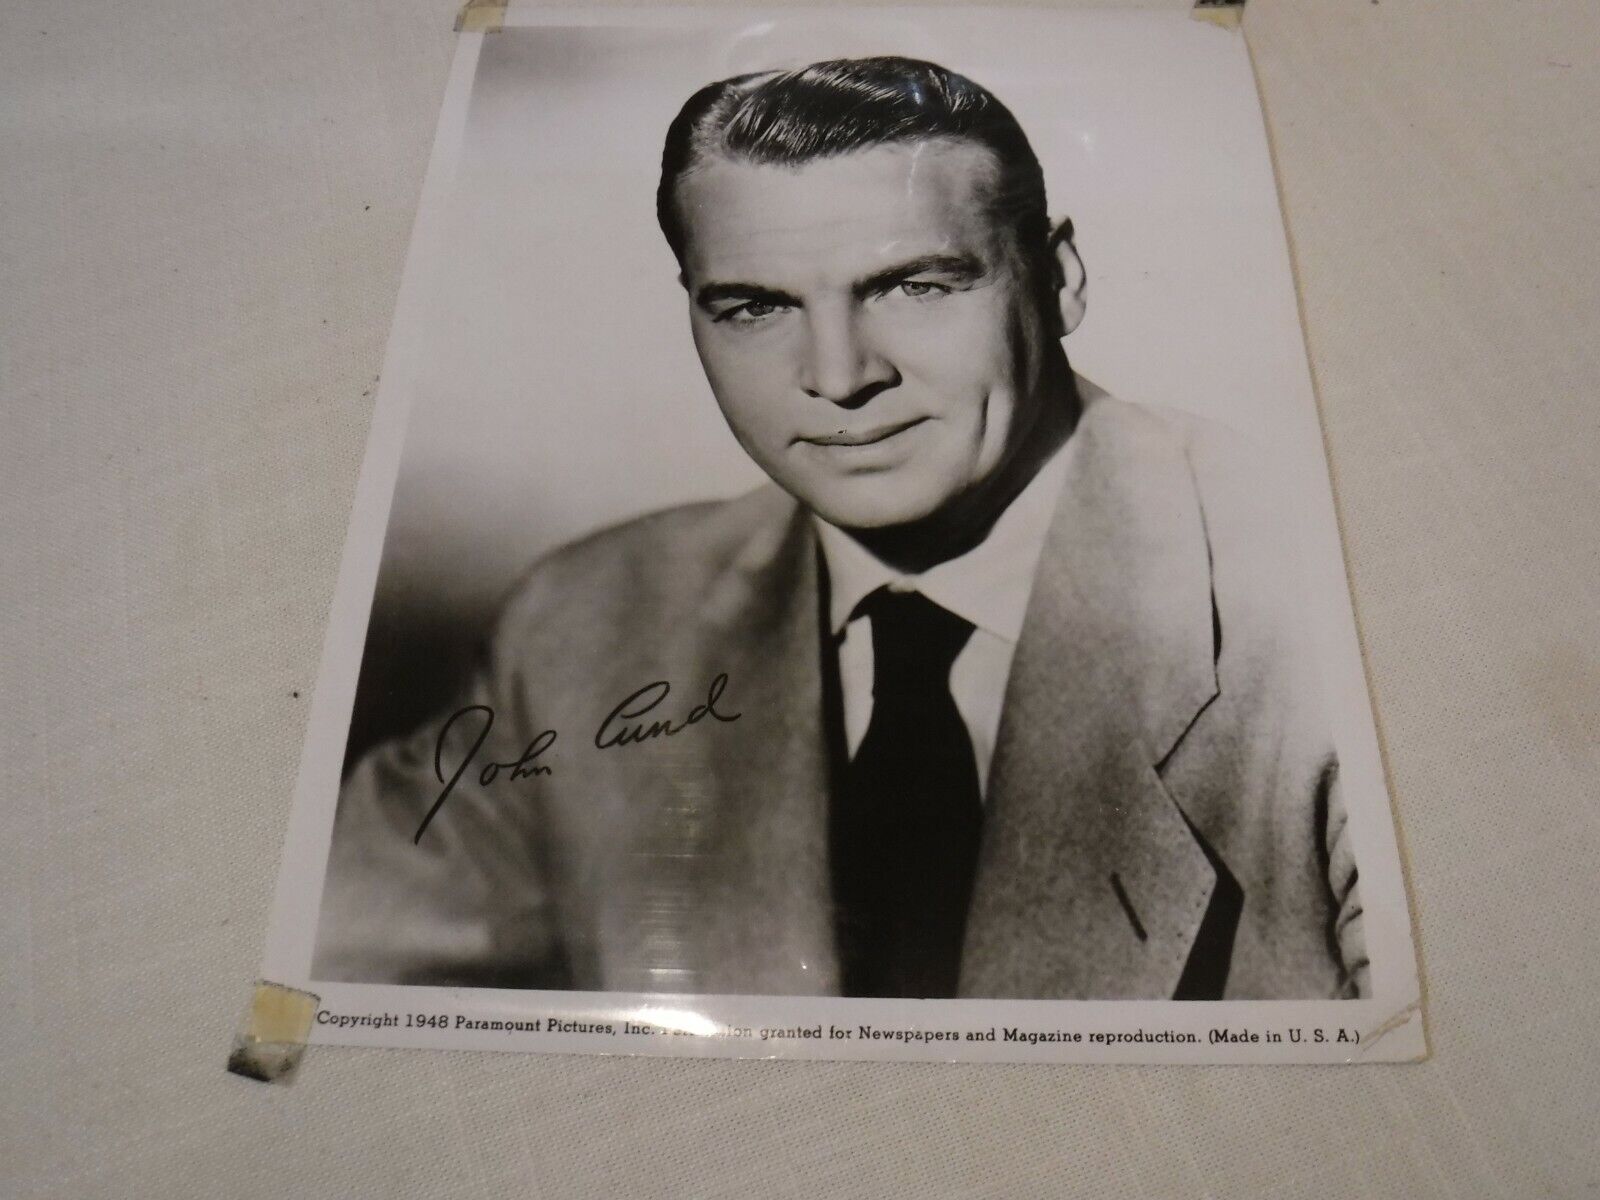 1948 Studio Release Photo John Lund with autograpgh